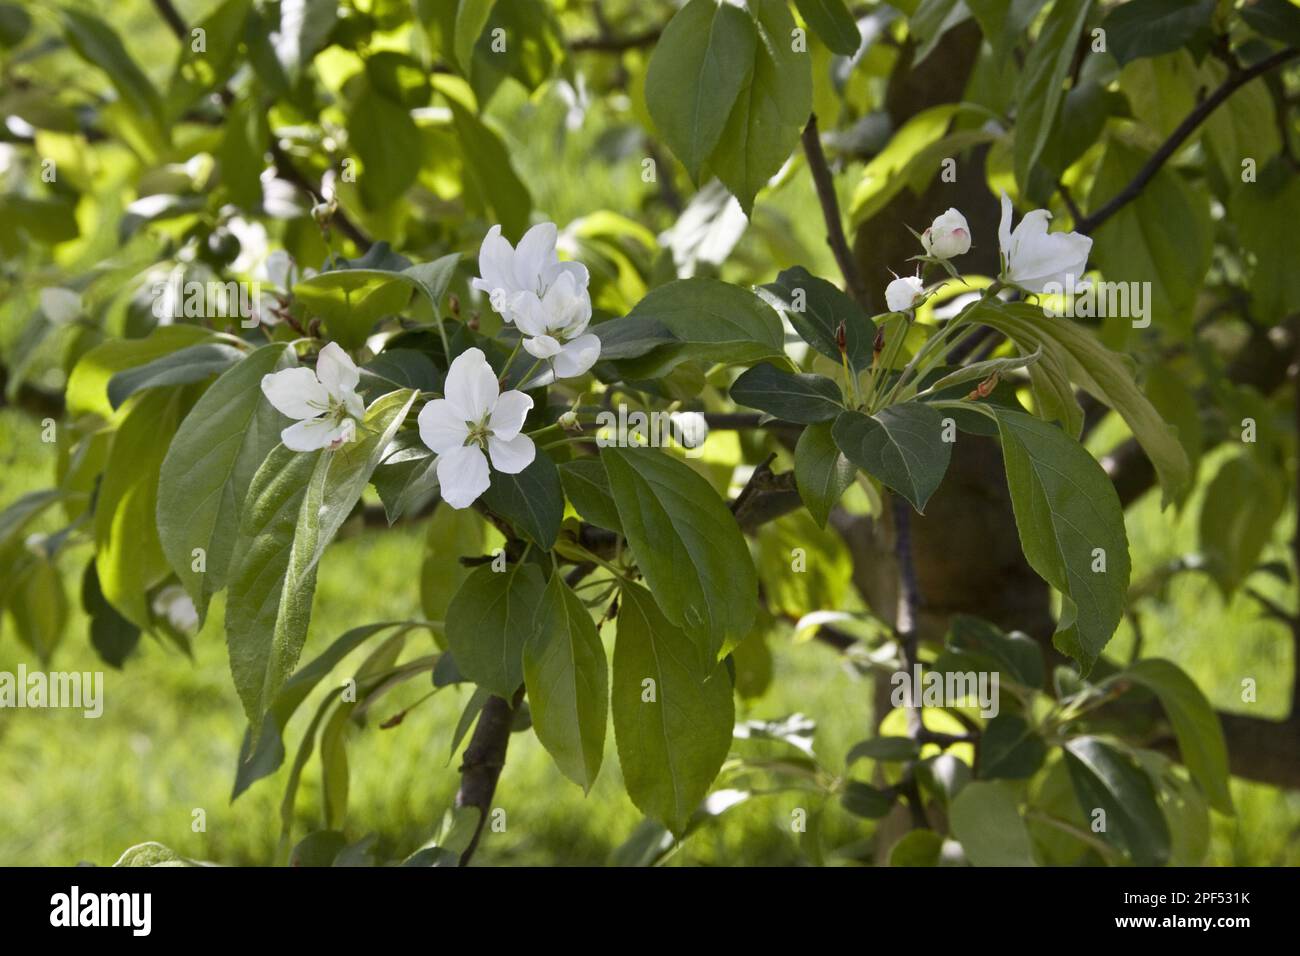 Cherry apple, berry apple, rose family, flower of Malus baccata Stock Photo